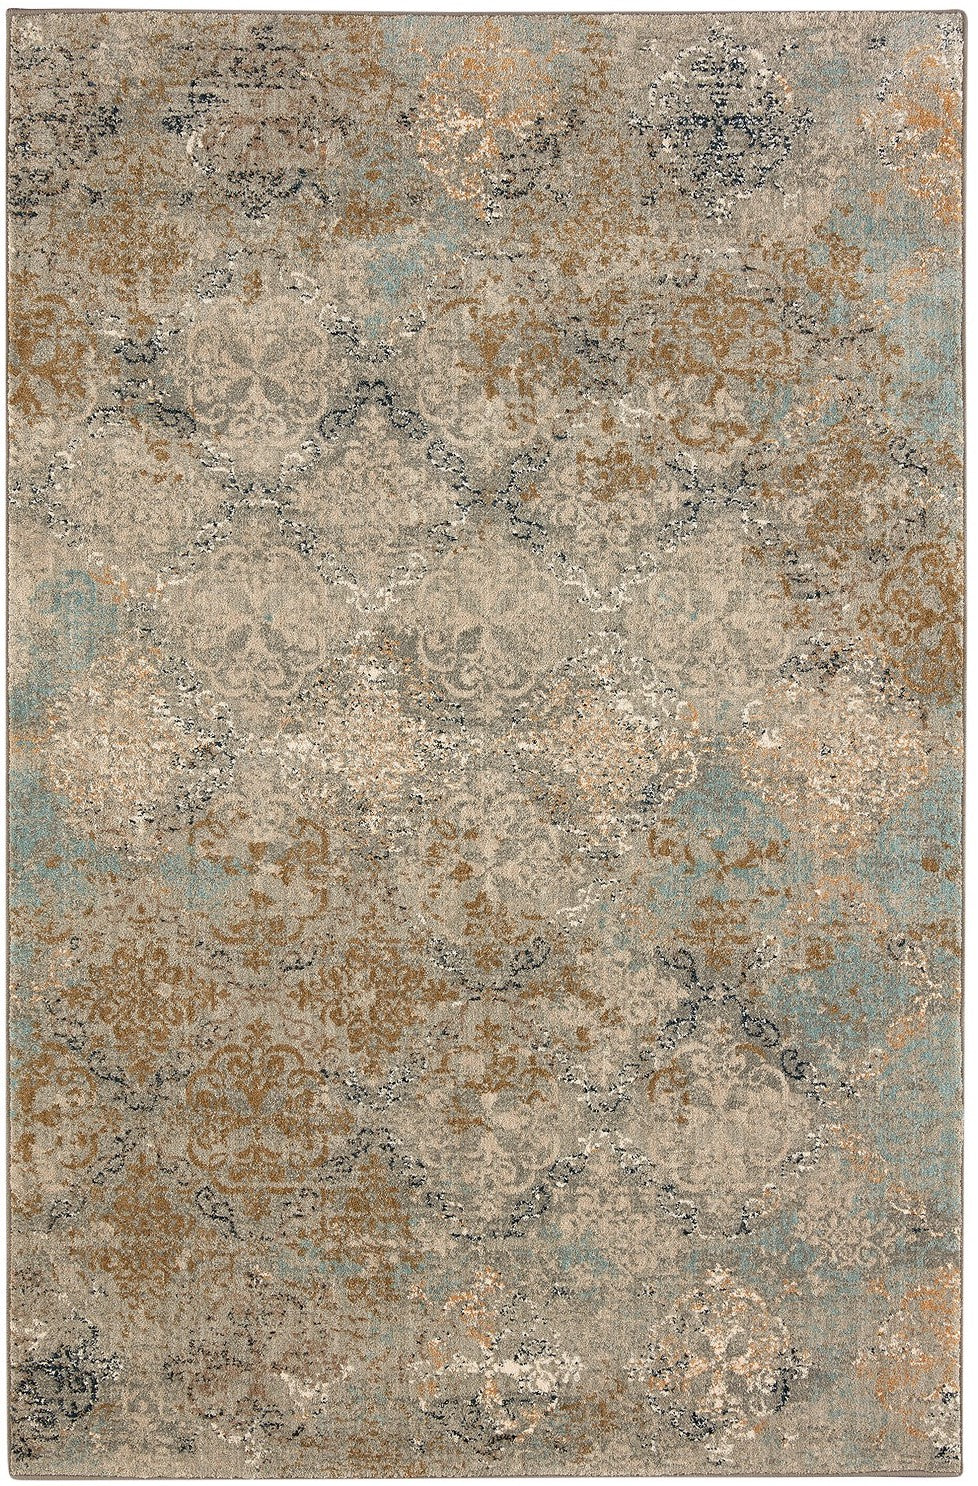 Pet Friendly Touchstone Moy Willow Grey Rug stain proof pet rug good for dos and cats karastan online rug traditional